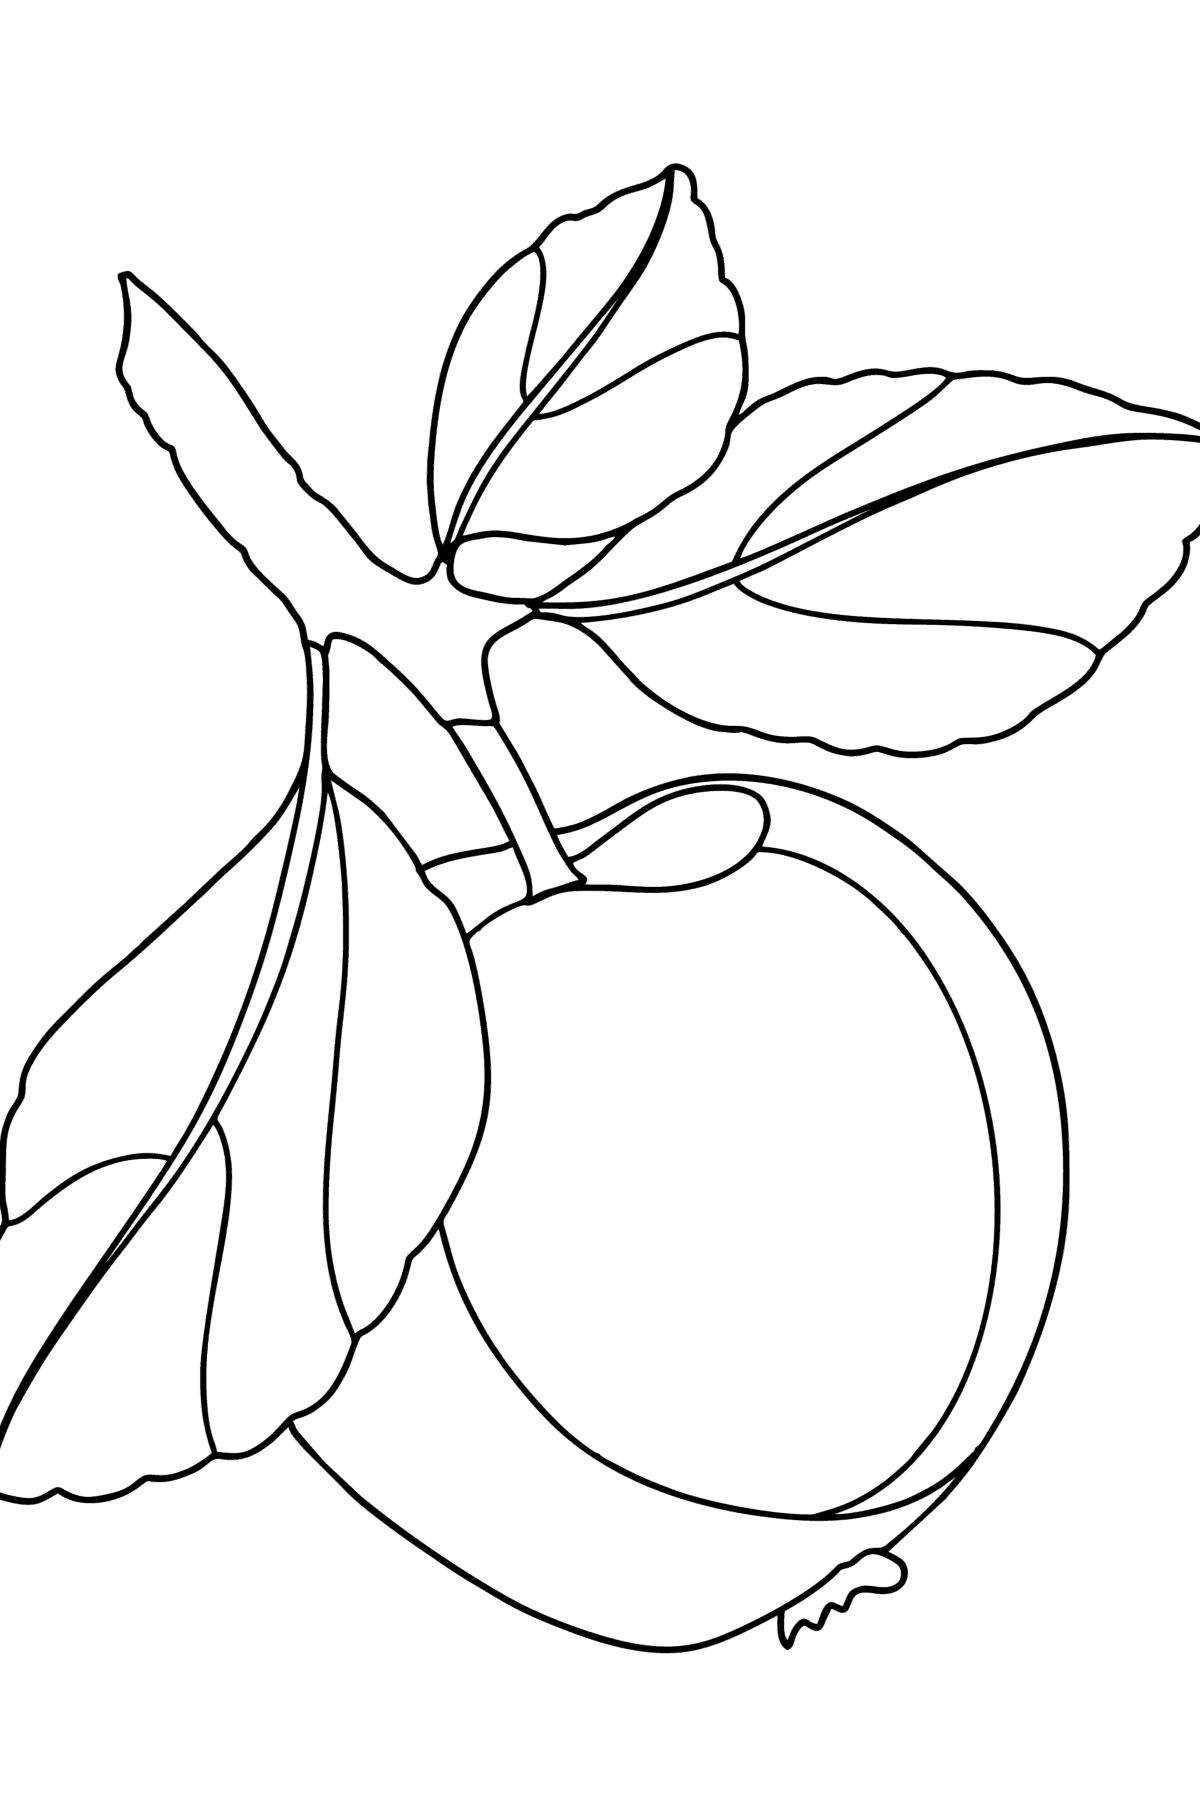 Red Apple сoloring page - Coloring Pages for Kids